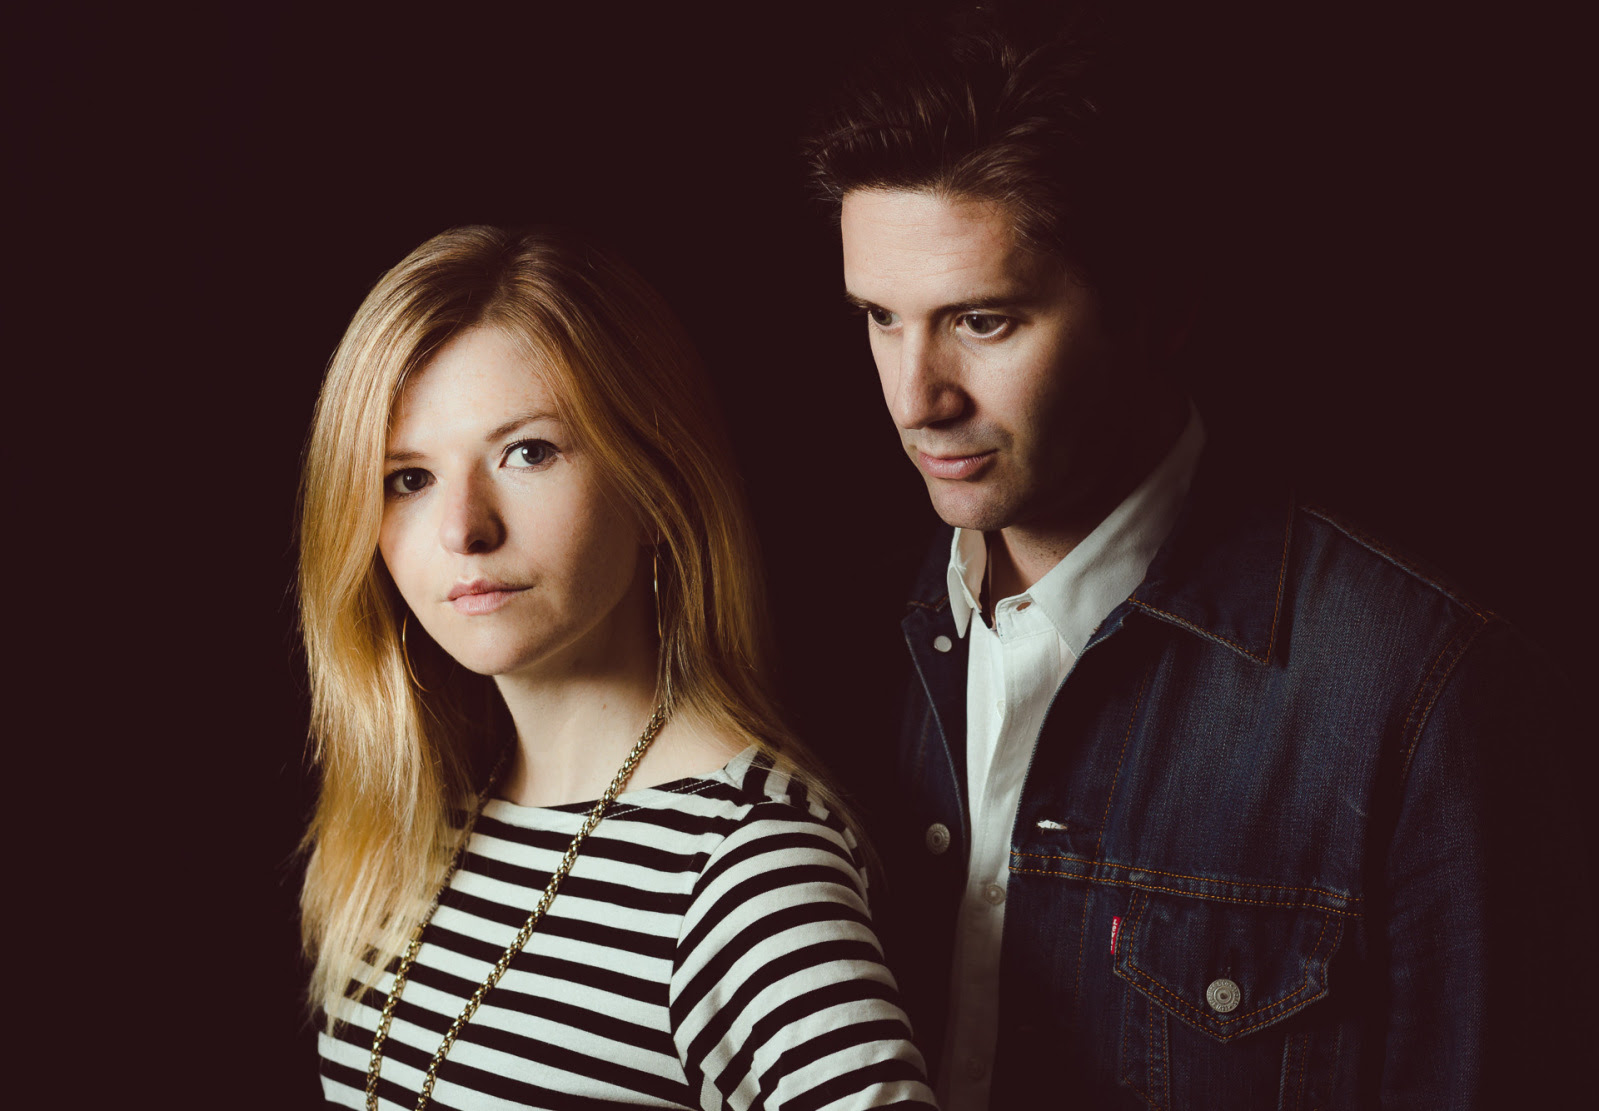 Track Of The Day #769: Still Corners - Horses at Night